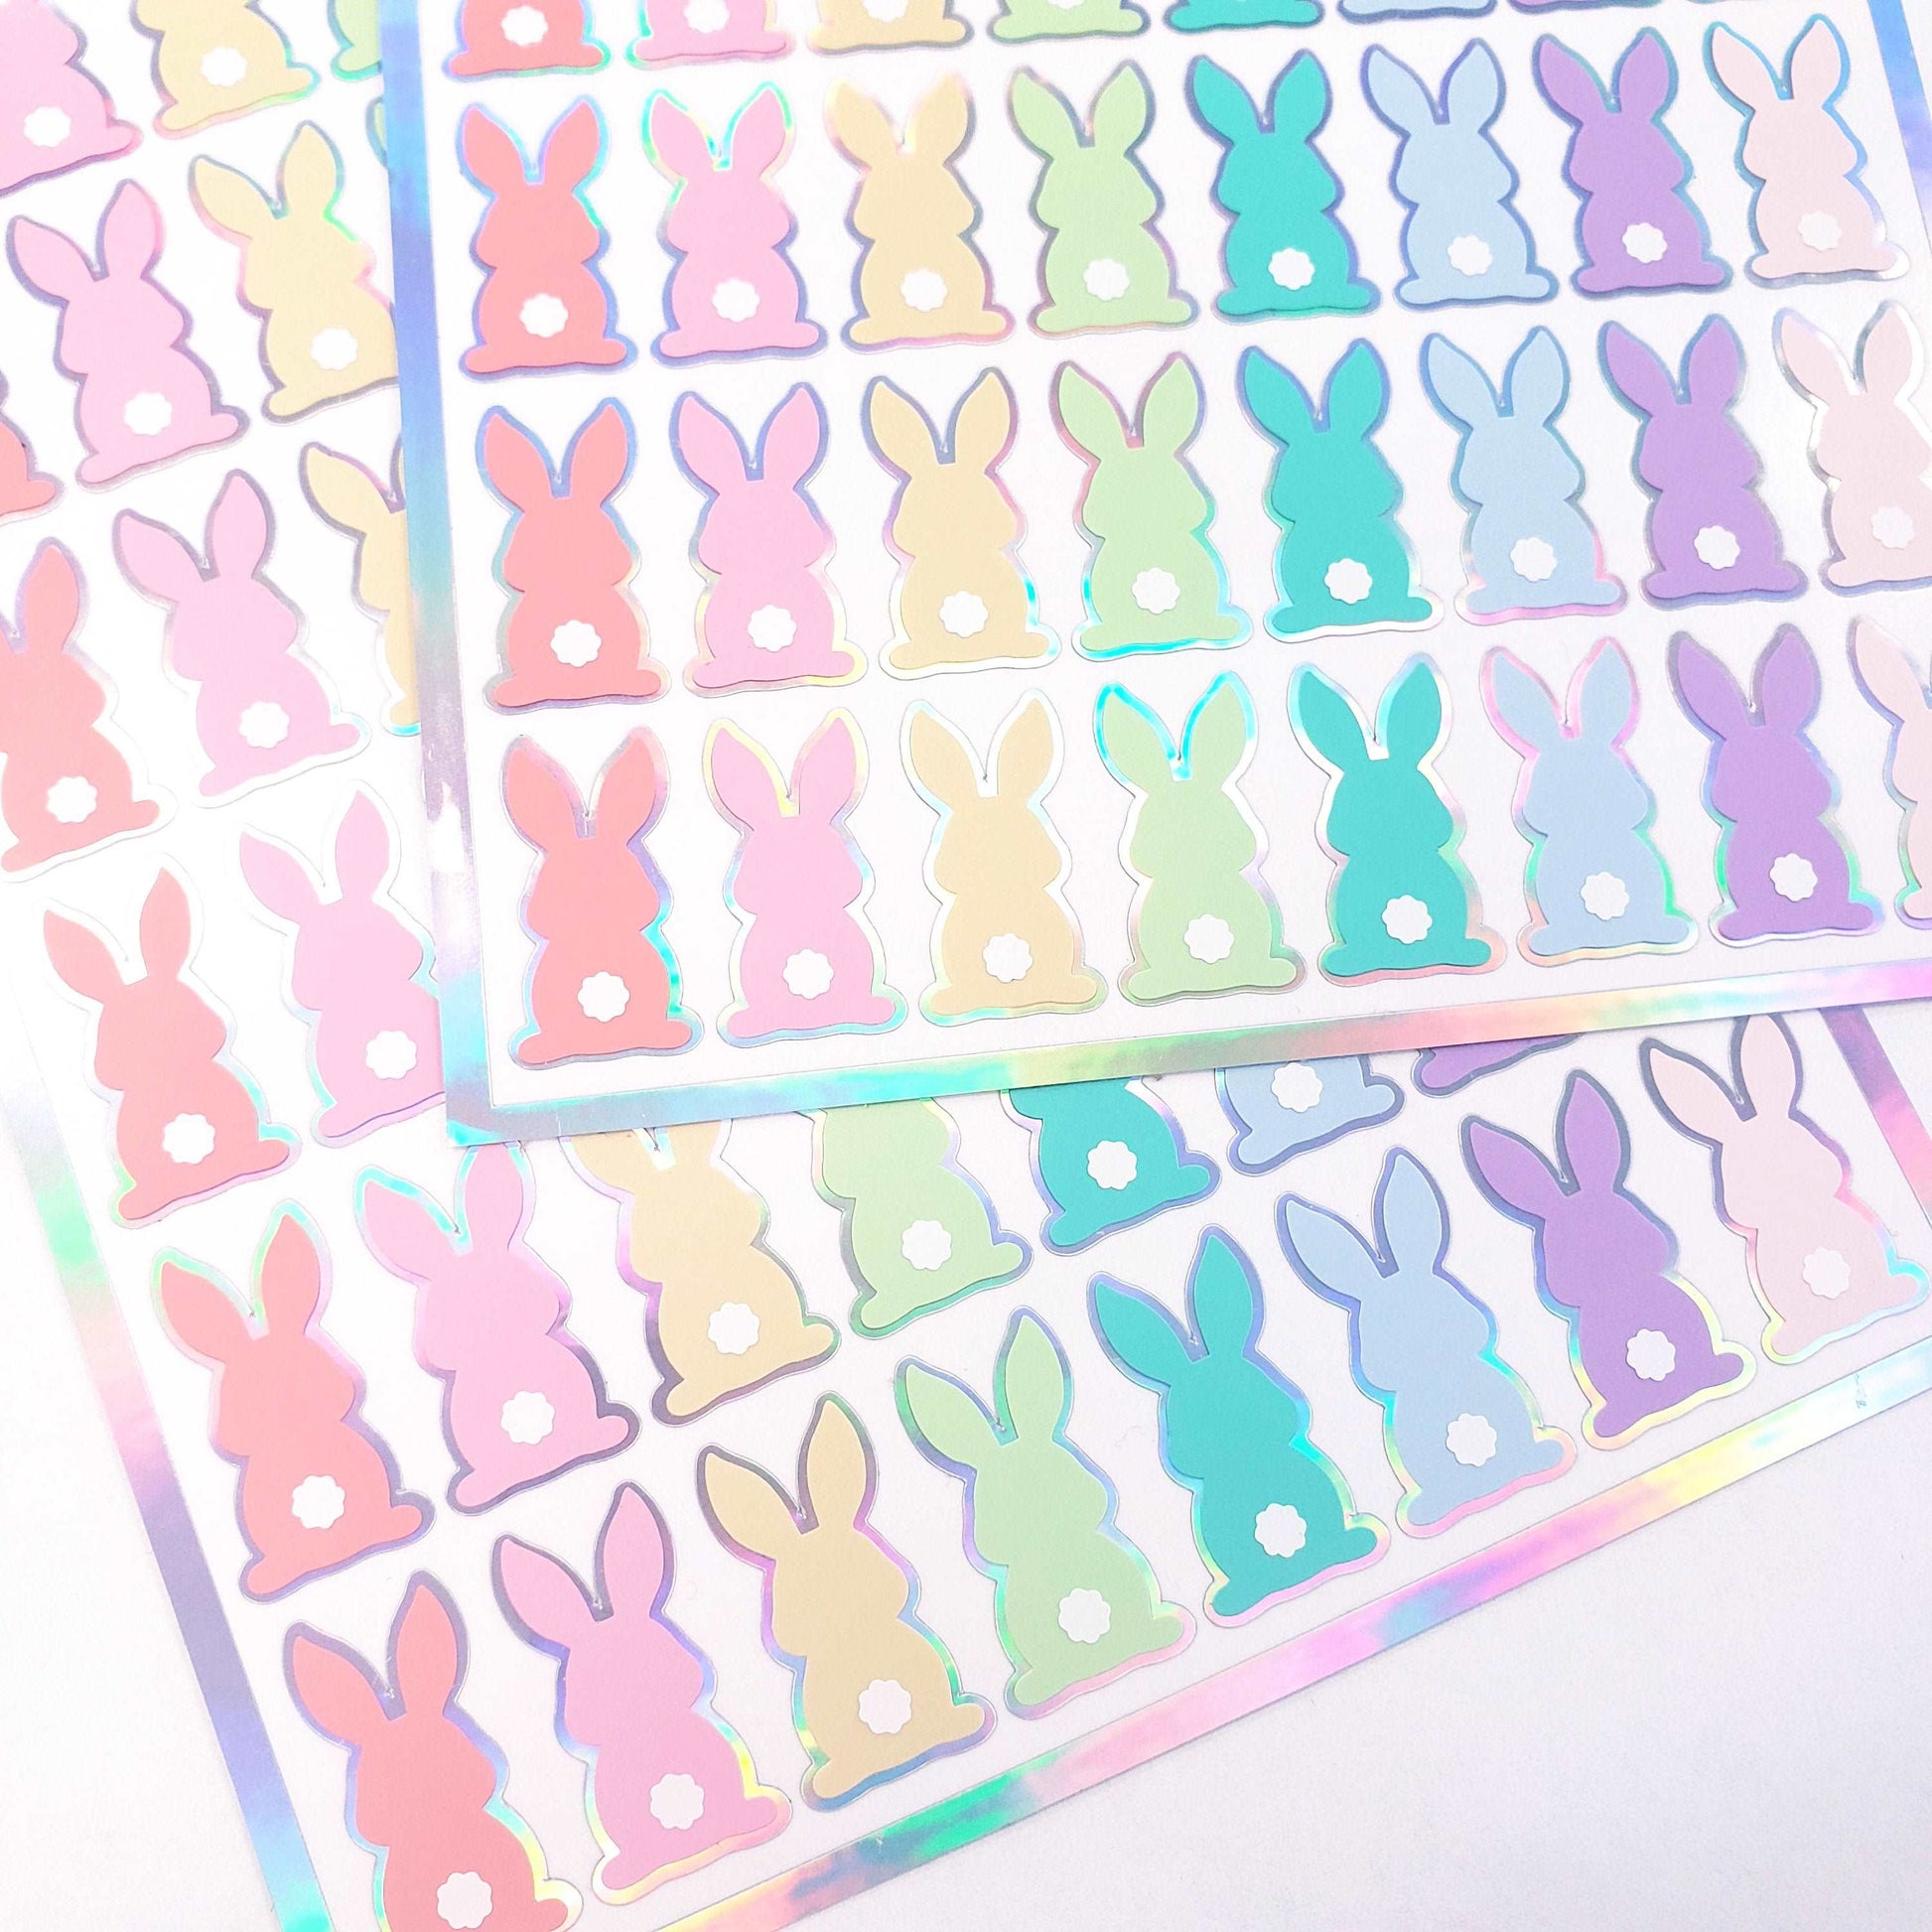 White Easter Bunny Stickers, set of 48 cute vinyl bunnies for Spring crafts, Easter baskets and Mother's Day cards.